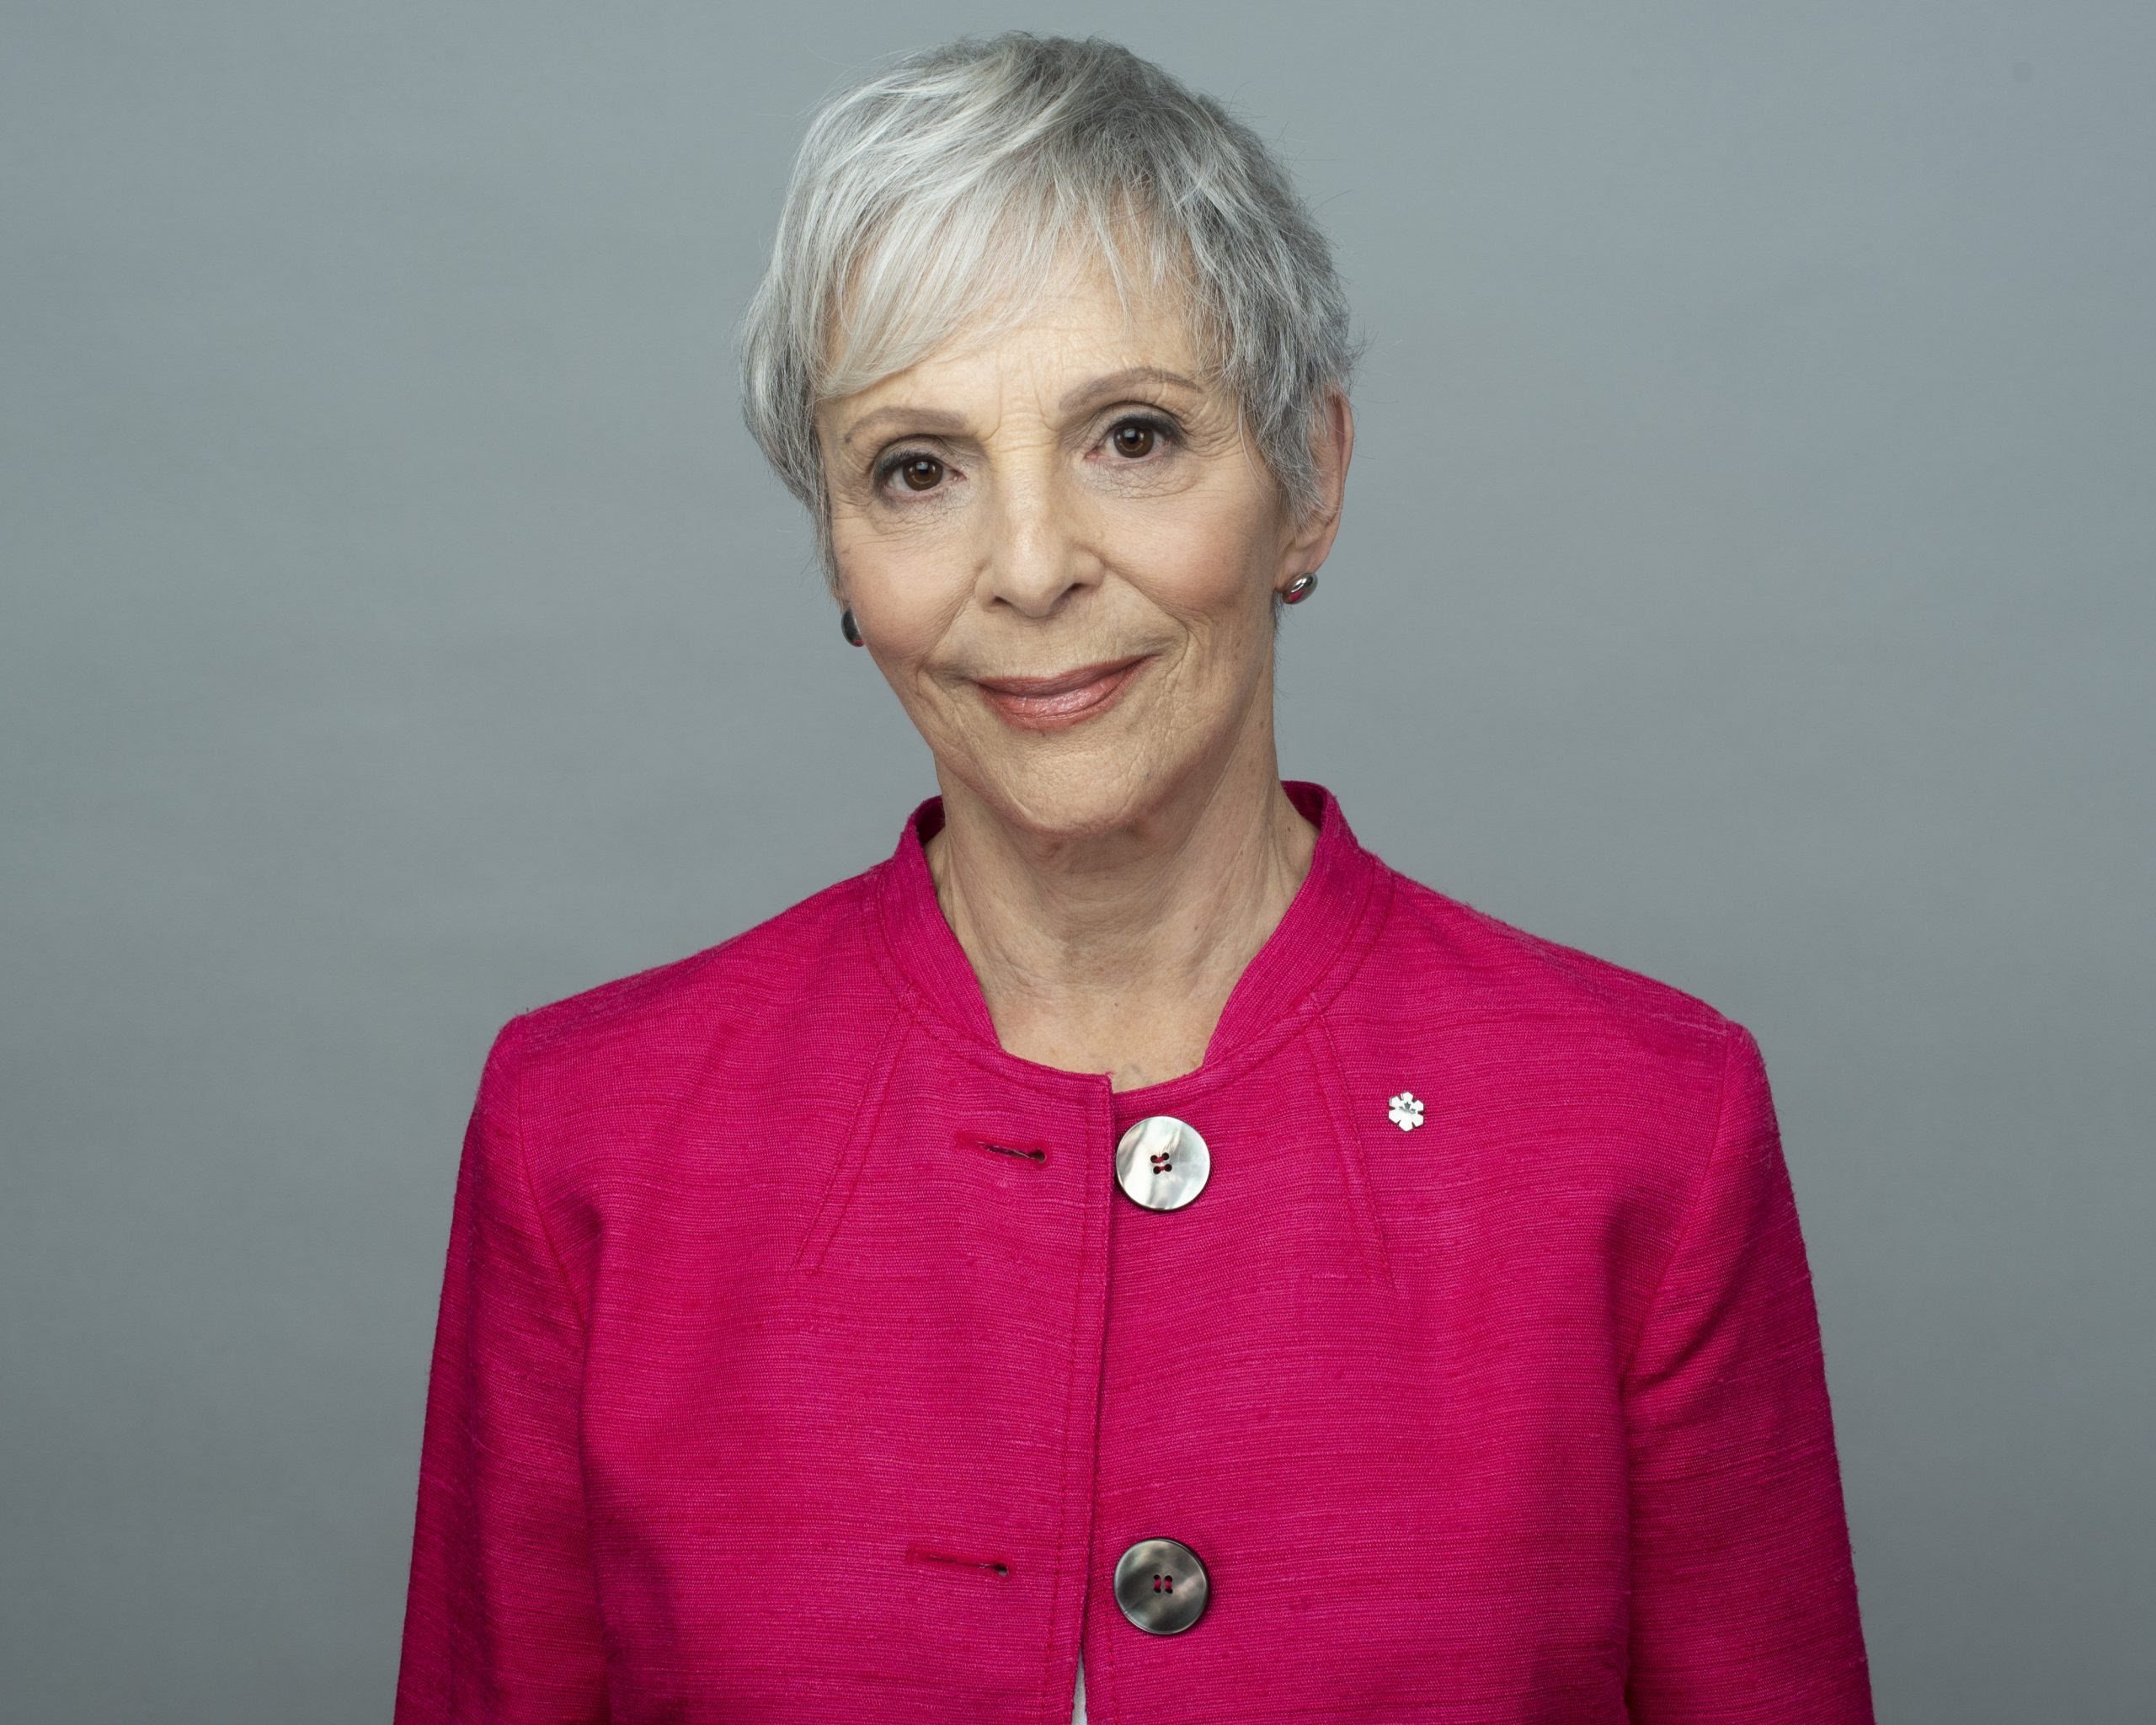 A woman with short silver hair is smiling and wearing a pink suit.